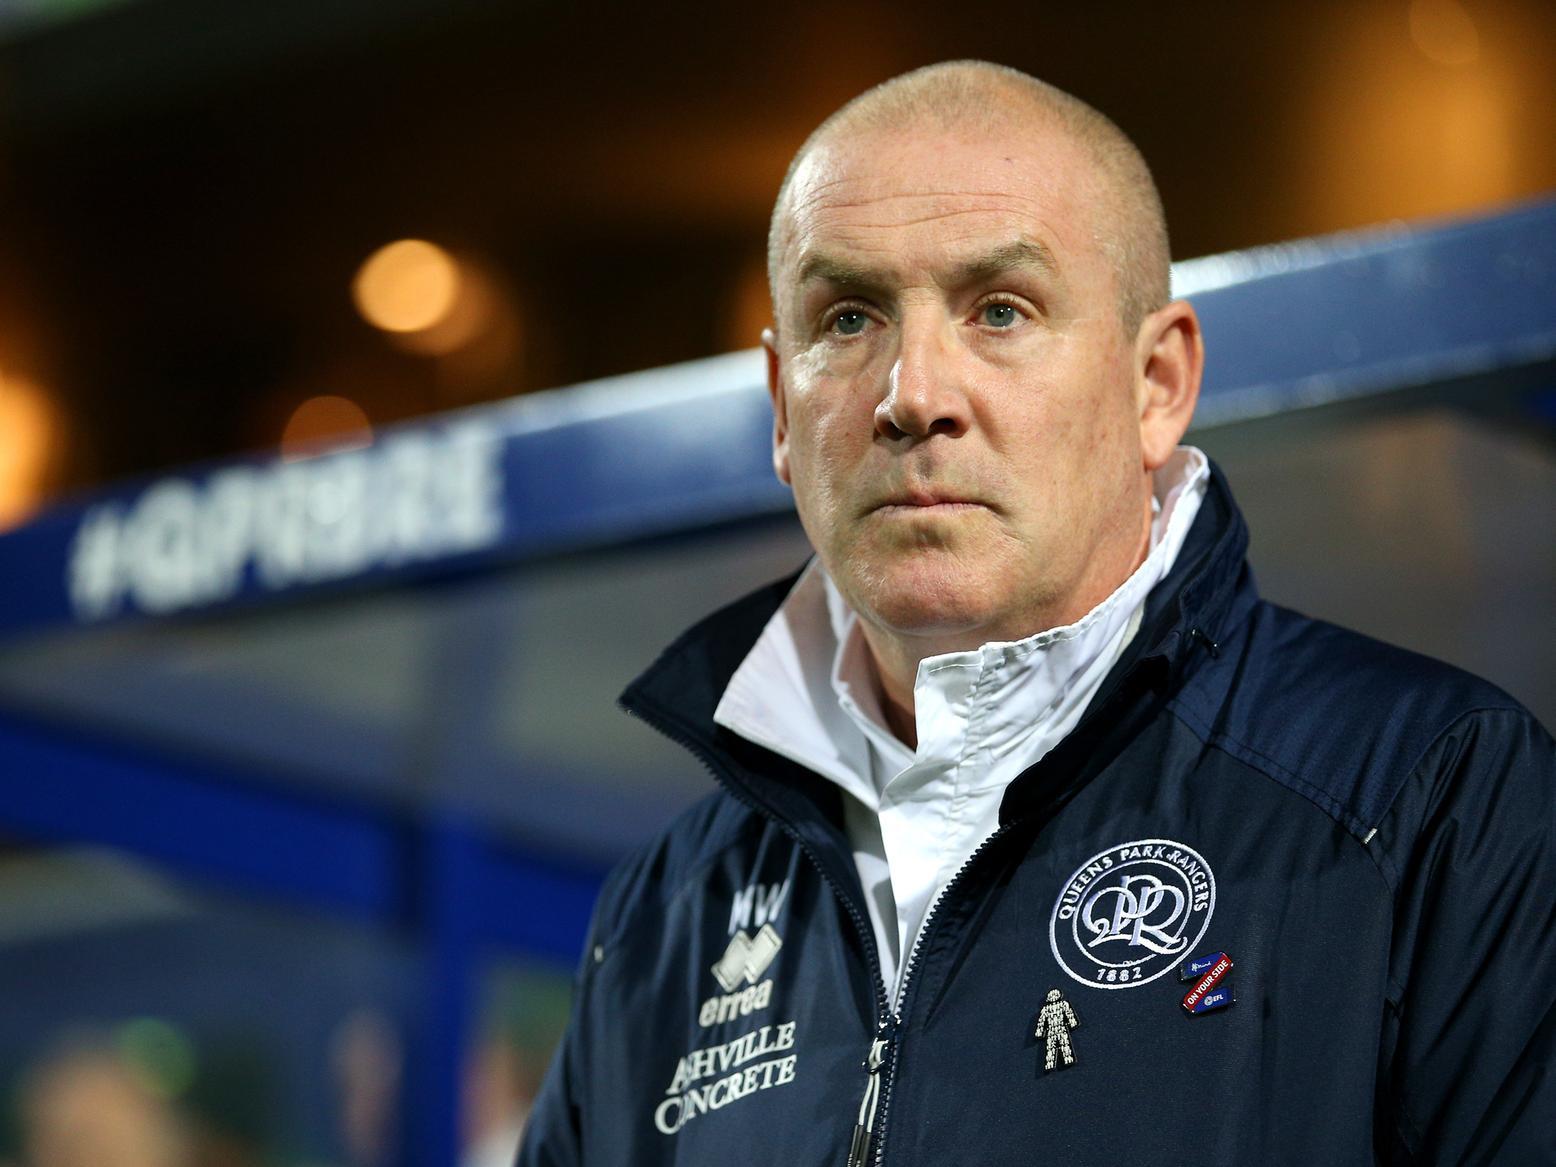 QPR boss Mark Warburton branded the referee's decision not to send Nottingham Forest's Danny Cash off for a wild challenge on Ryan Manning as "shocking", following their 4-0 hammering at Loftus Road. (HITC)